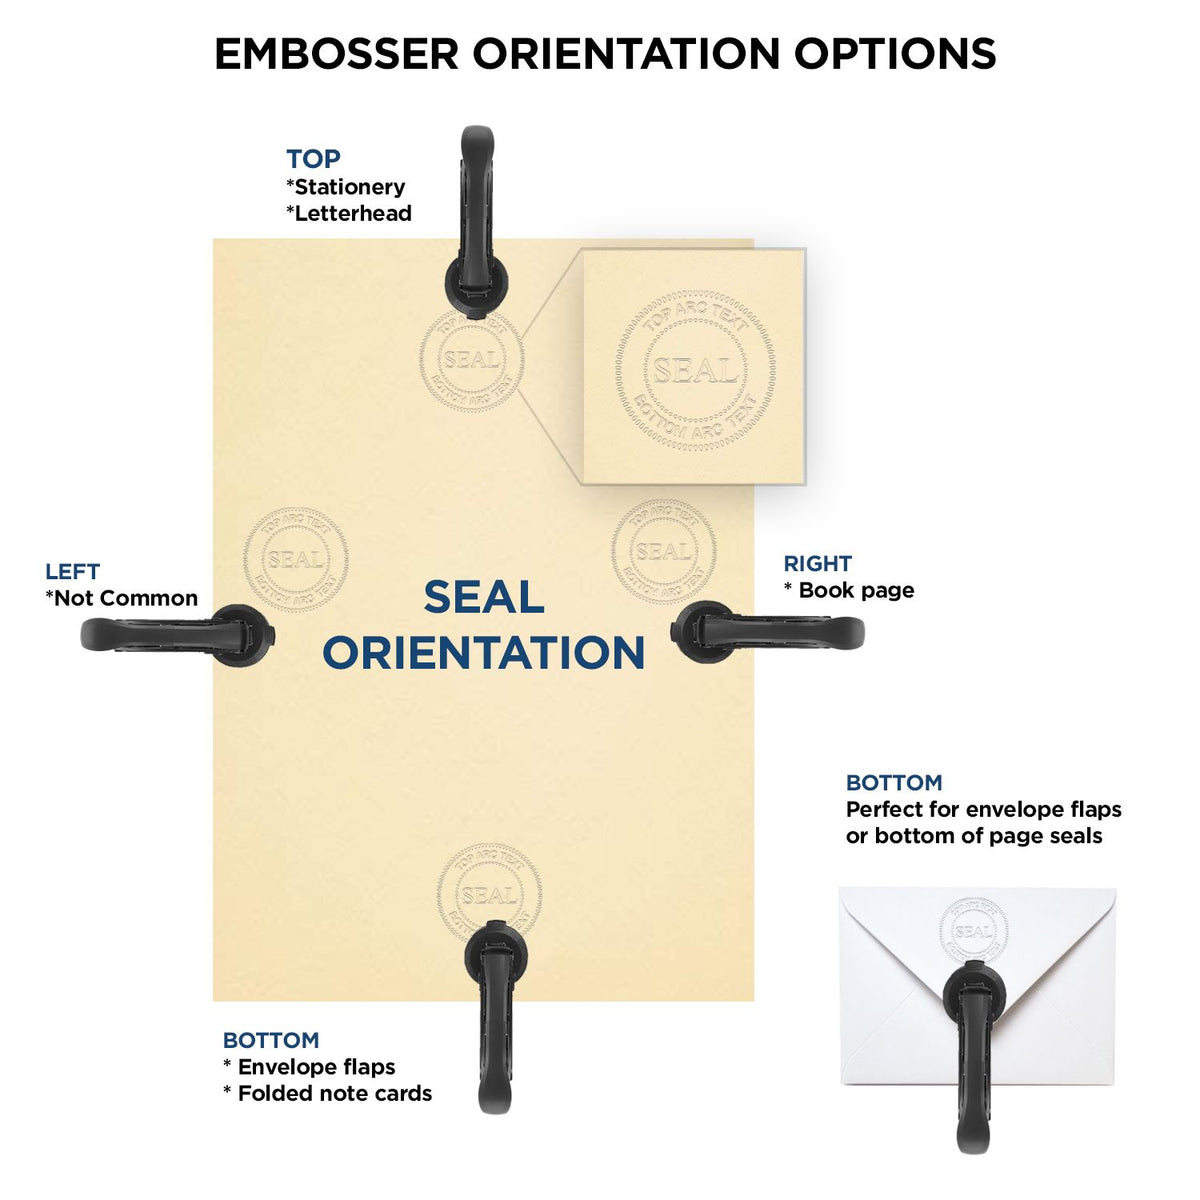 An infographic for the Heavy Duty Cast Iron Hawaii Engineer Seal Embosser showing embosser orientation, this is showing examples of a top, bottom, right and left insert.